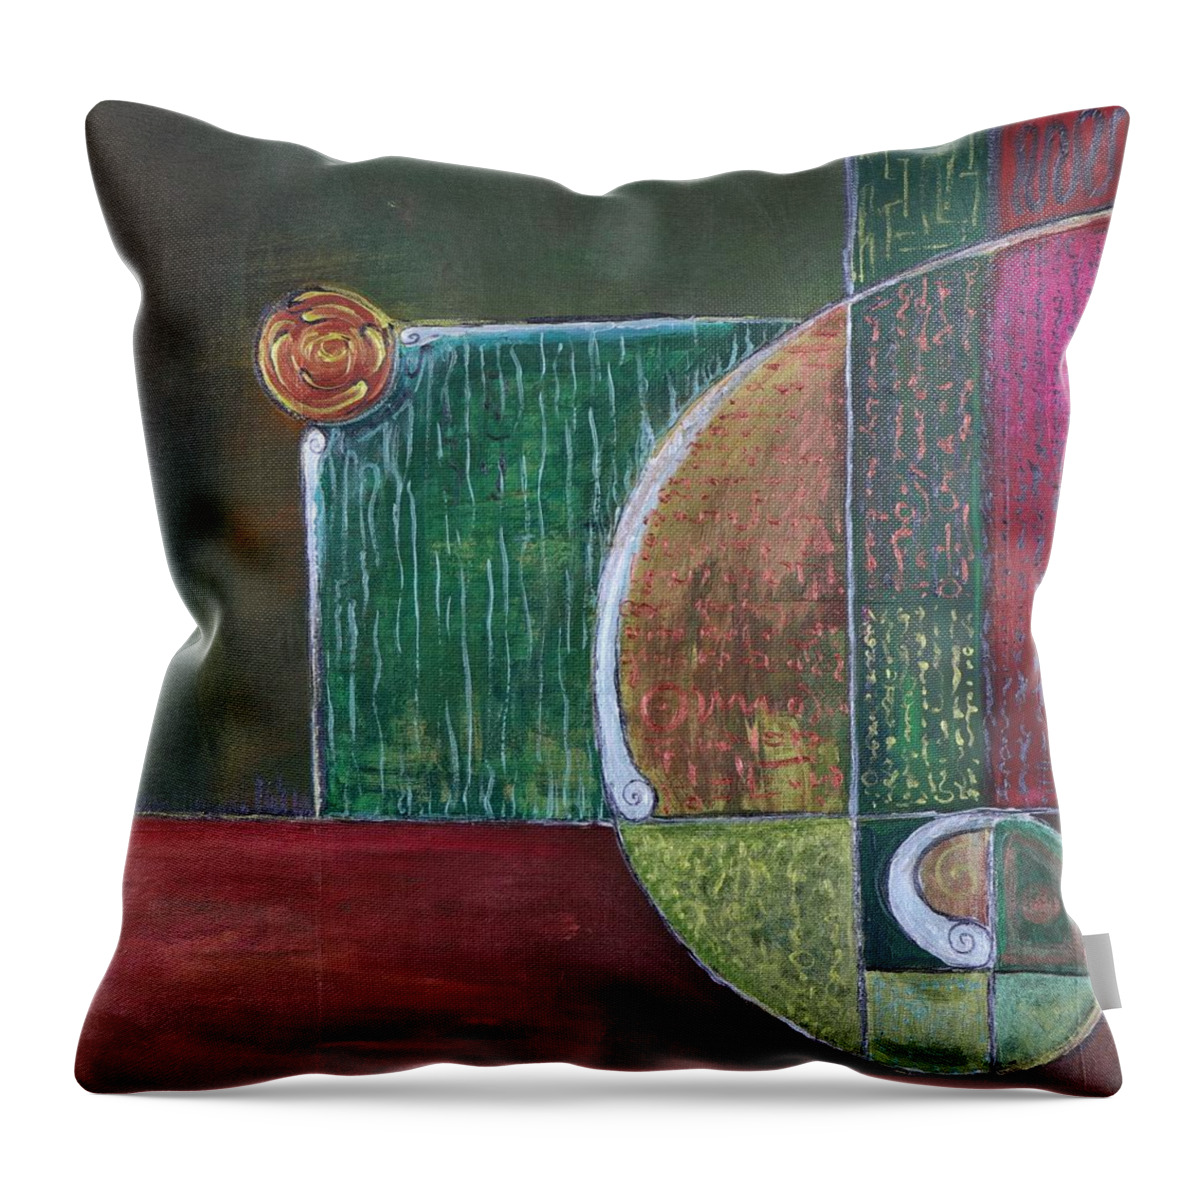 Abstract Throw Pillow featuring the painting The Golden Mean by Raymond Fernandez